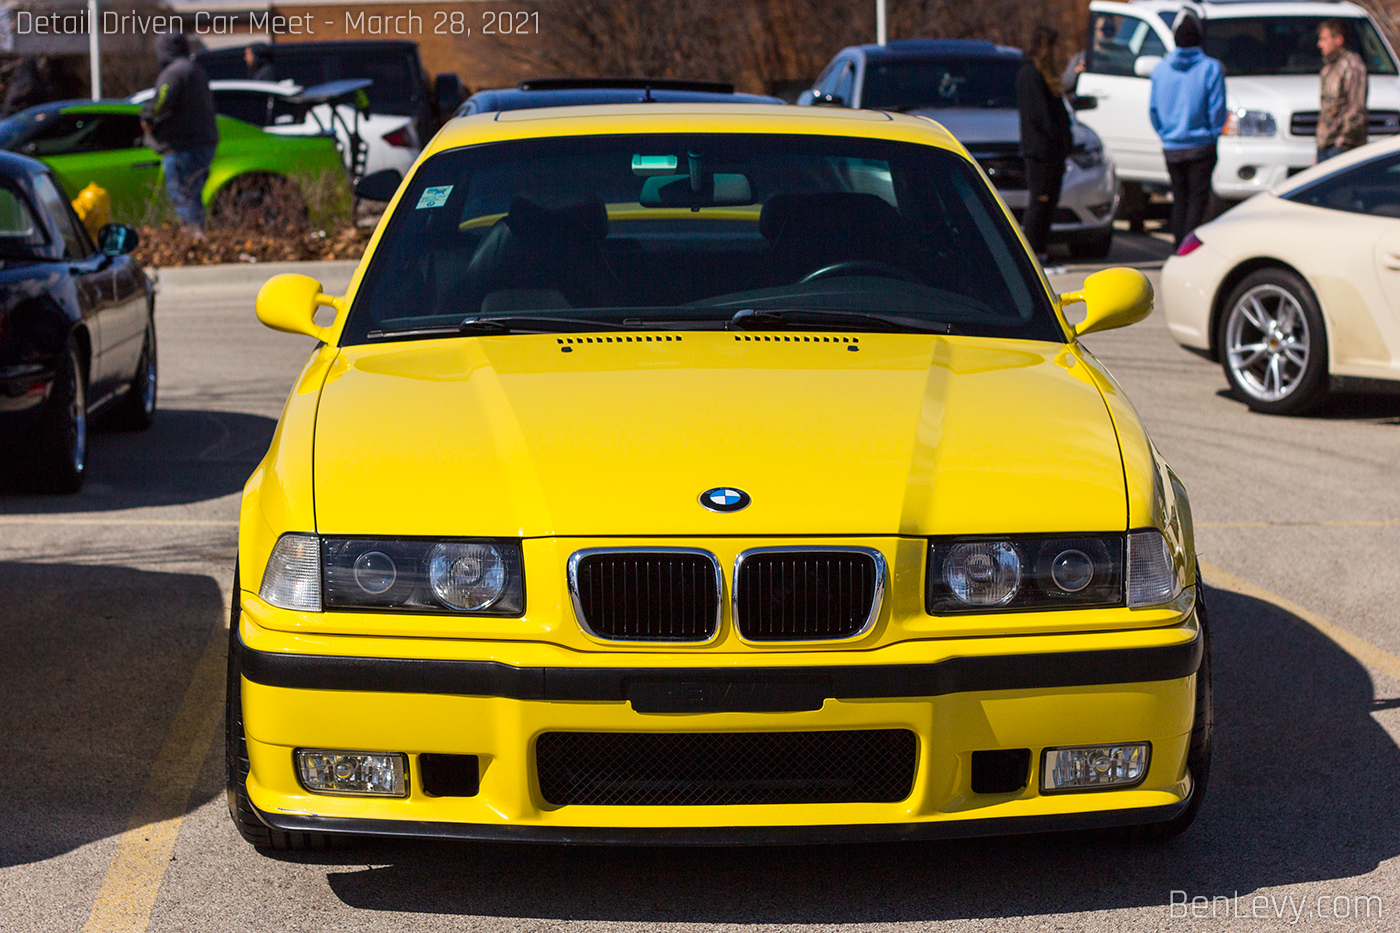 Front of Yellow BMW E36 M3